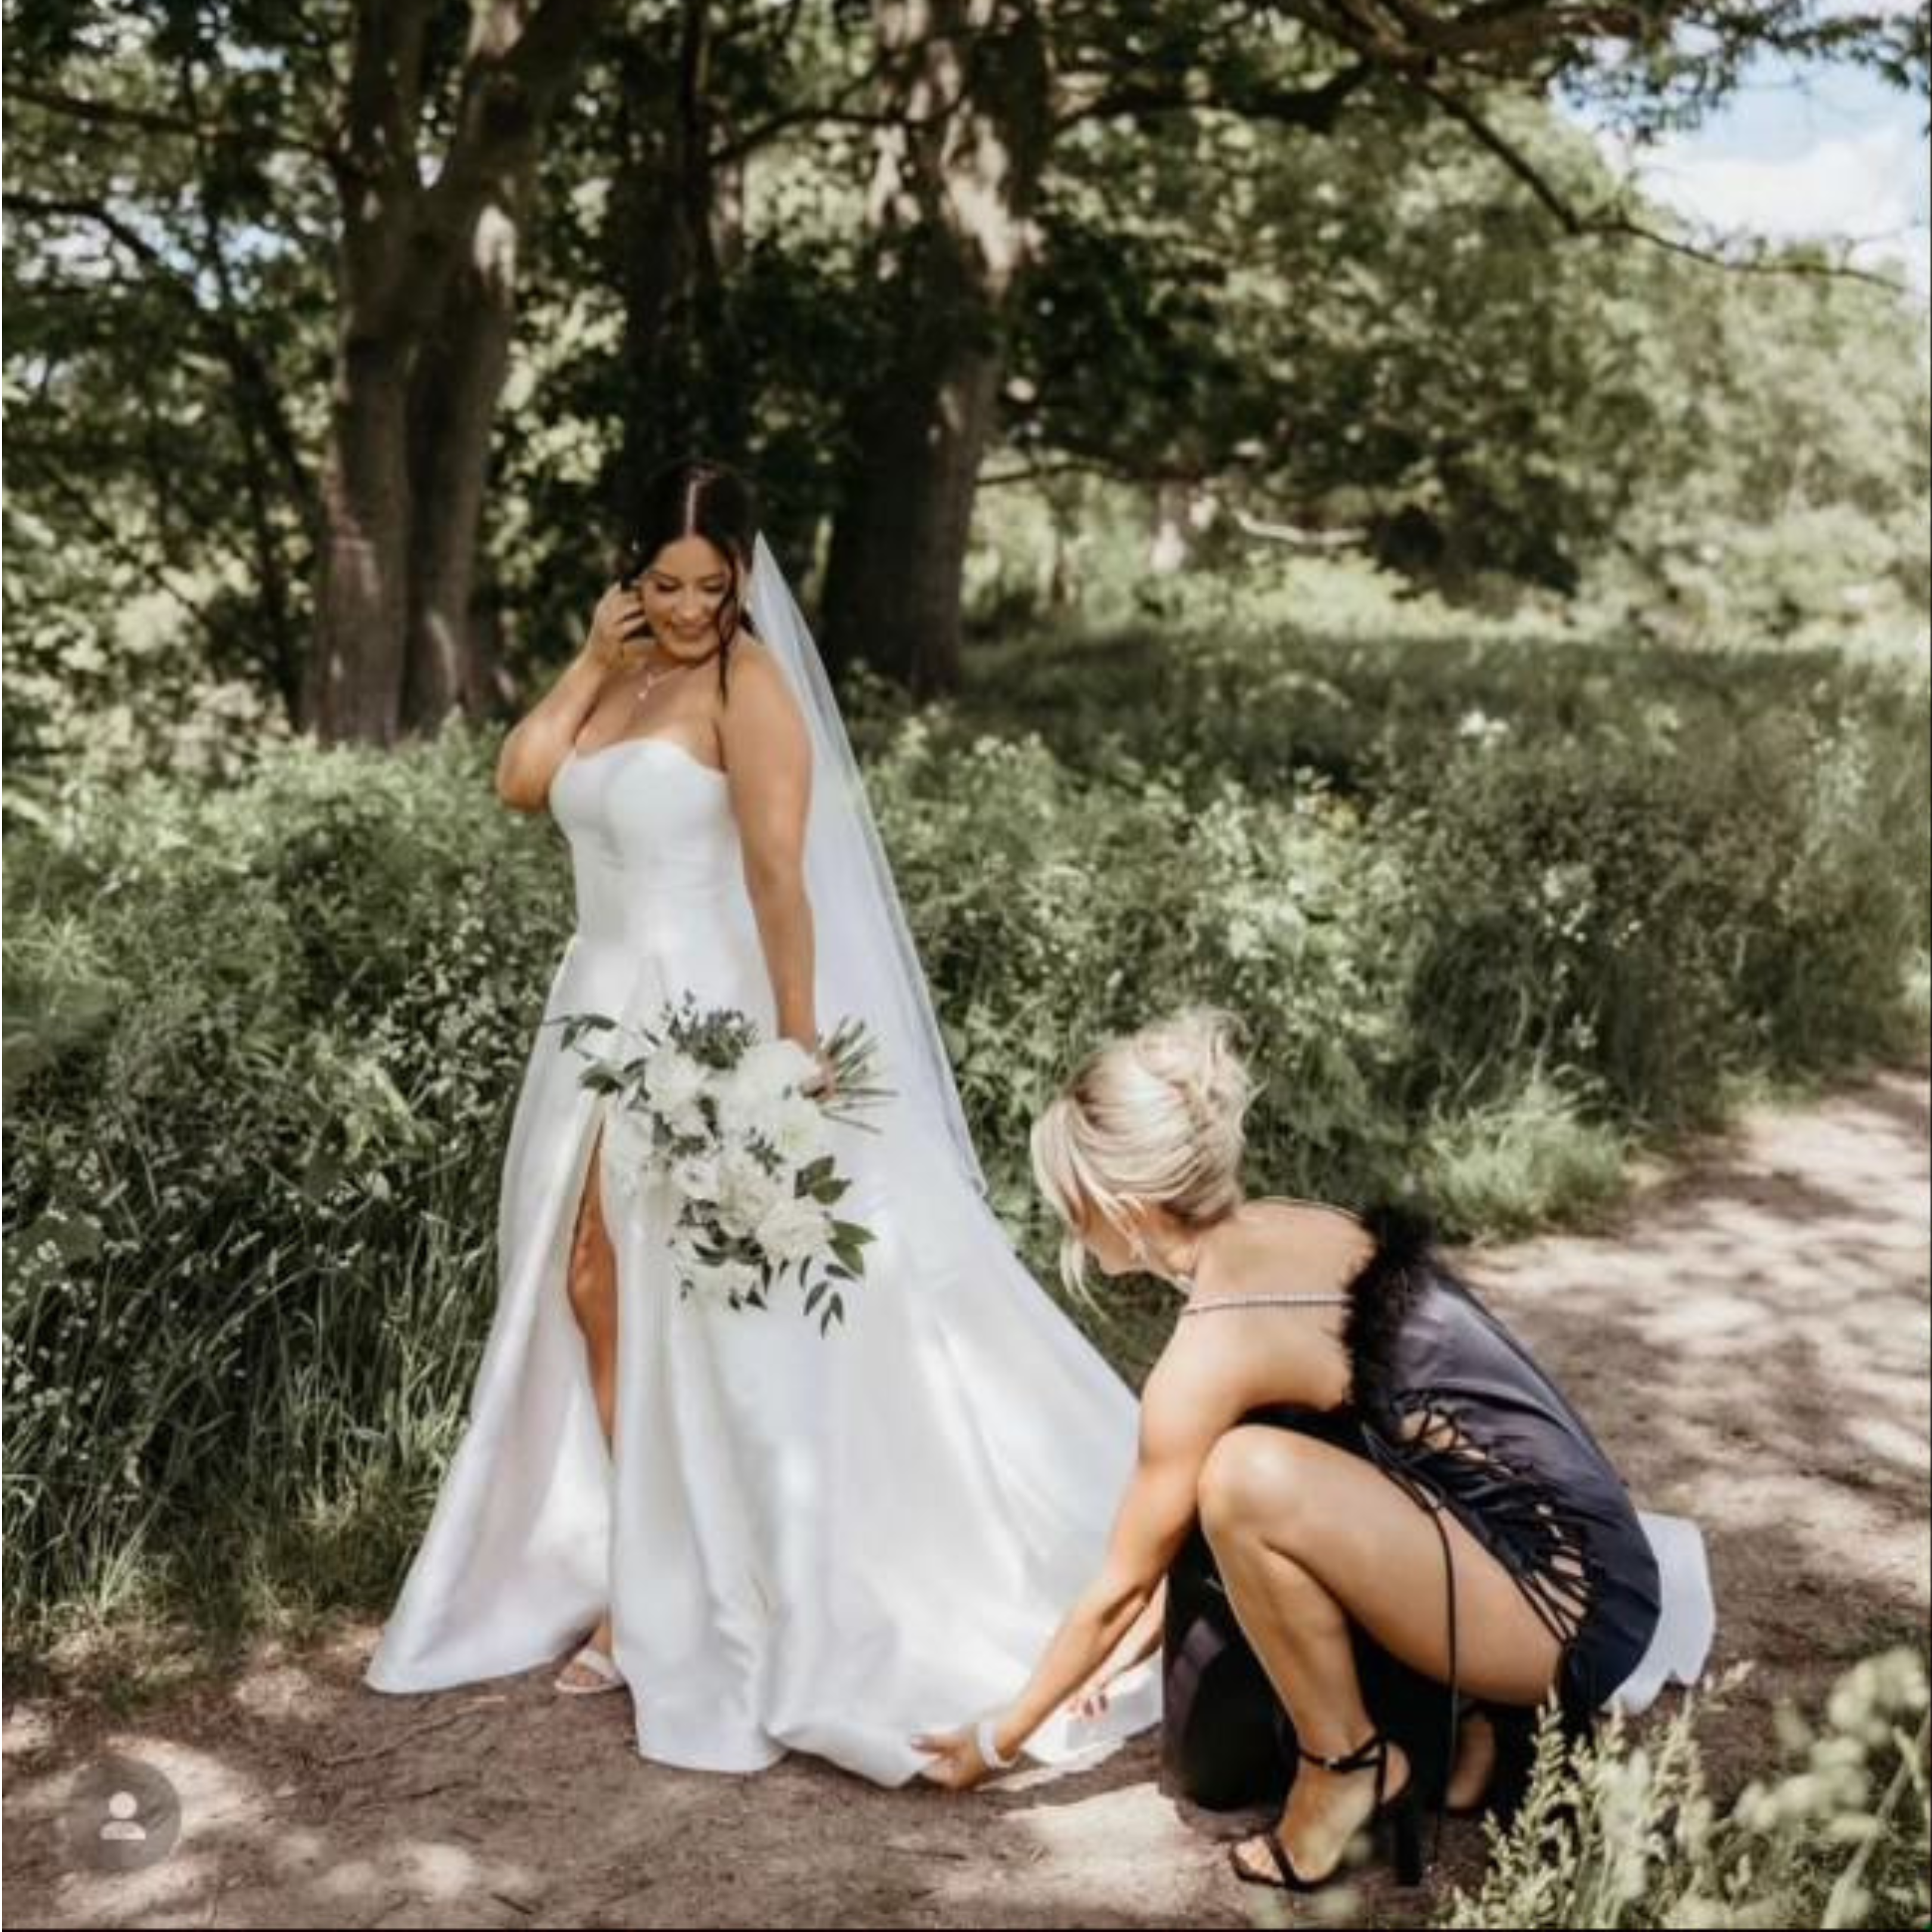 Bridesmaid fixing brides gown